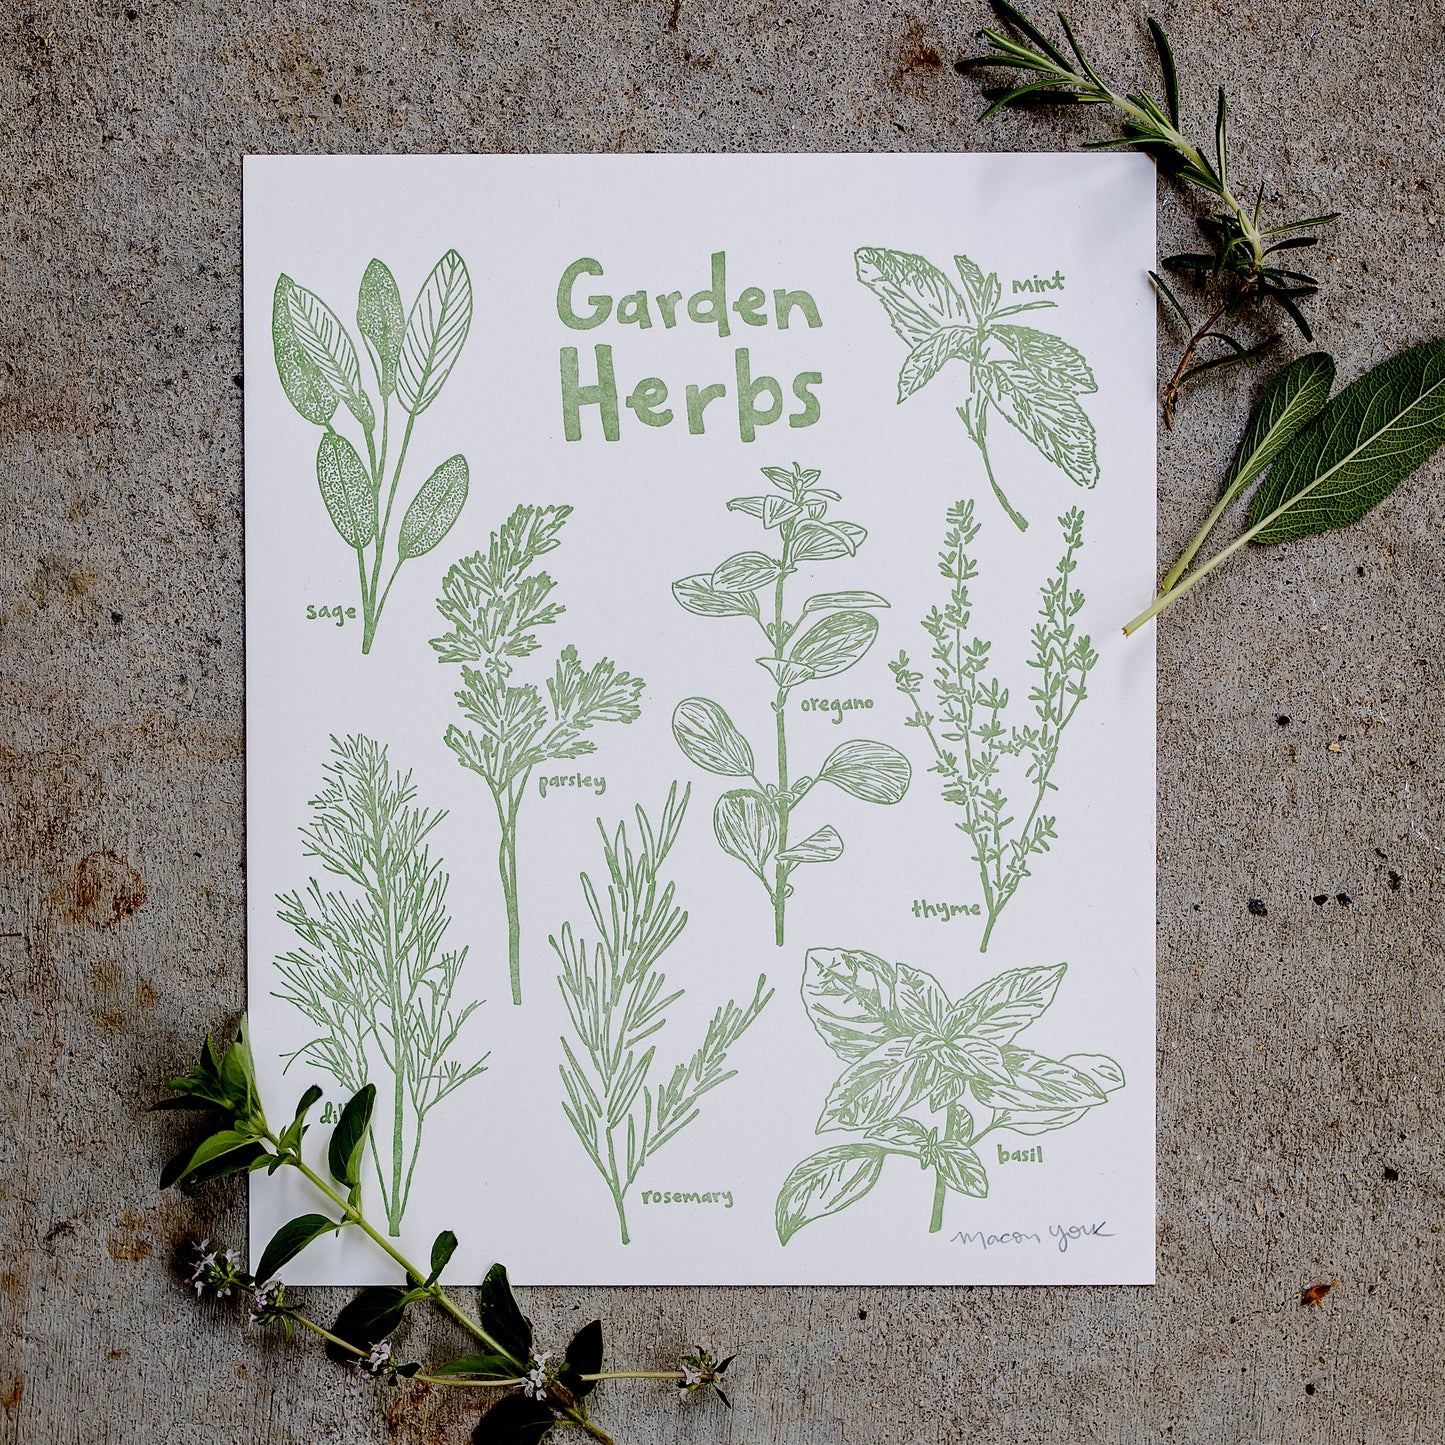 8x10 Letterpress art print featuring original whimsical illustrations of sage, mint, oregano, parsley, thyme, dill, basil, and rosemary. Each plant is labeled in hand-drawn typography. The herbs are letterpress printed on 100% cotton paper in a vibrant sage-green ink.  Print is shown on a concrete floor with sprigs of sage and rosemary on the top right corner, and oregano and thyme on the bottom left. 